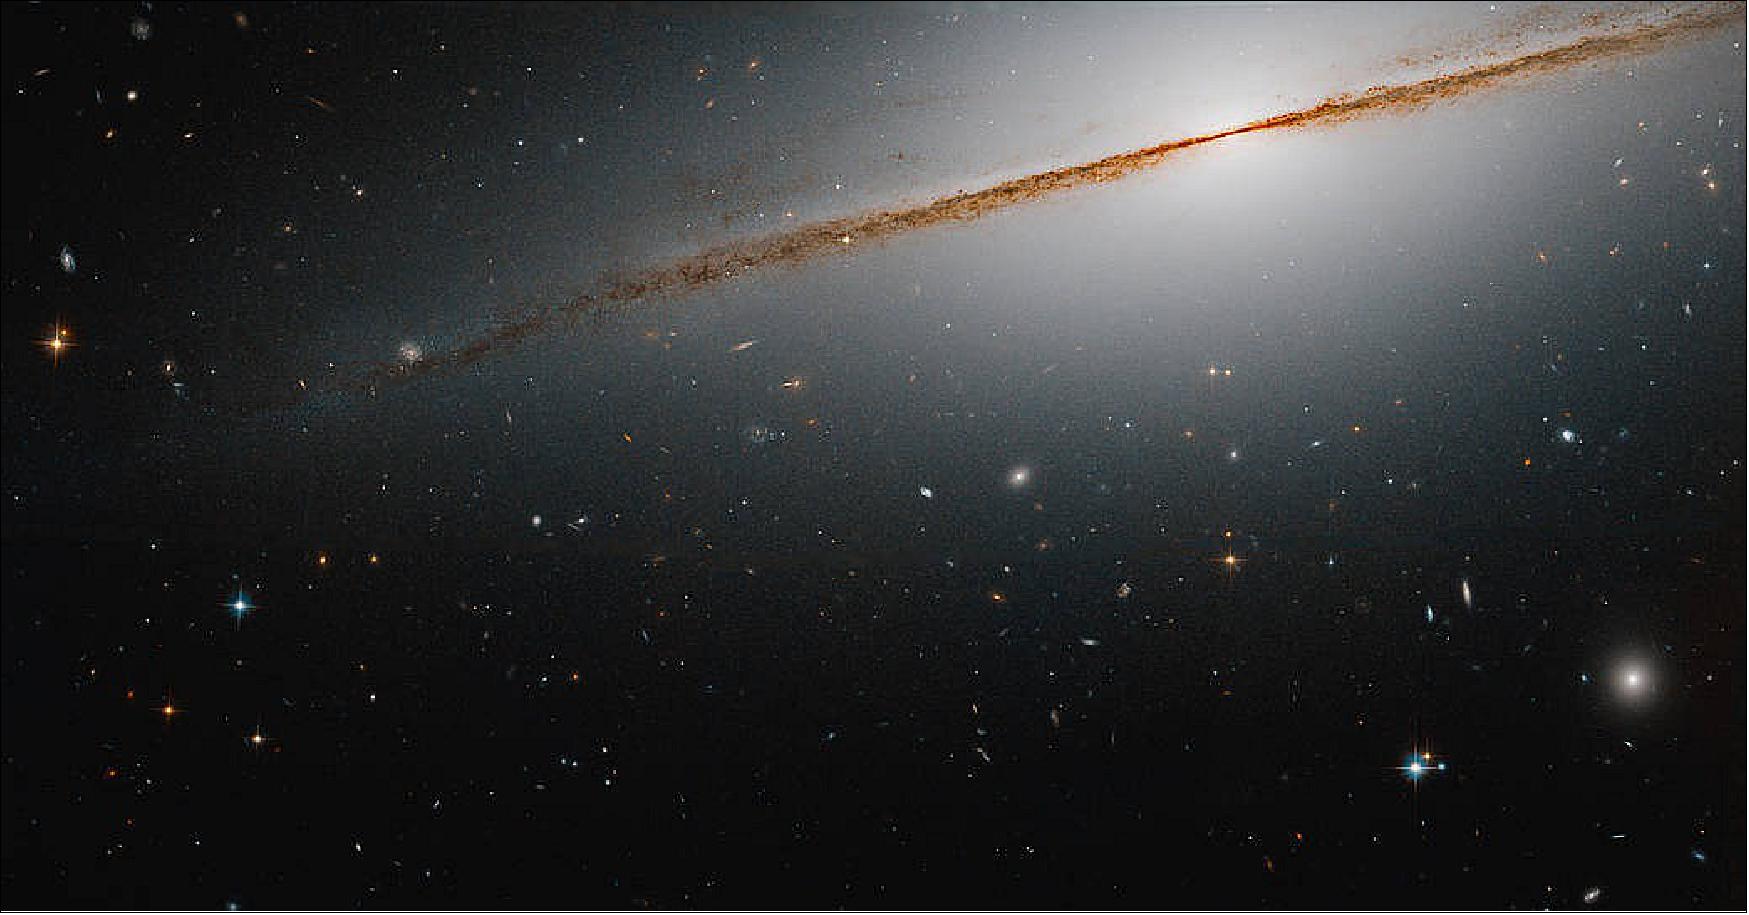 Figure 42: This image of the Little Sombrero is a combination of visible and infrared observations captured by Hubble’s Advanced Camera for Surveys in 2006. The observations were taken to assist astronomers in studying the galaxy’s stellar populations, and to help shed light on the evolution of this galaxy and others like it. Edge-on galaxy, with a distinctive dust lane, extending from upper right to middle-left of the image. Distant galaxies dot the scene [image credit: NASA, ESA, and R. de Jong (Leibniz-Institut fur Astrophysik Potsdam); Image processing: G. Kober (NASA Goddard/Catholic University of America)]